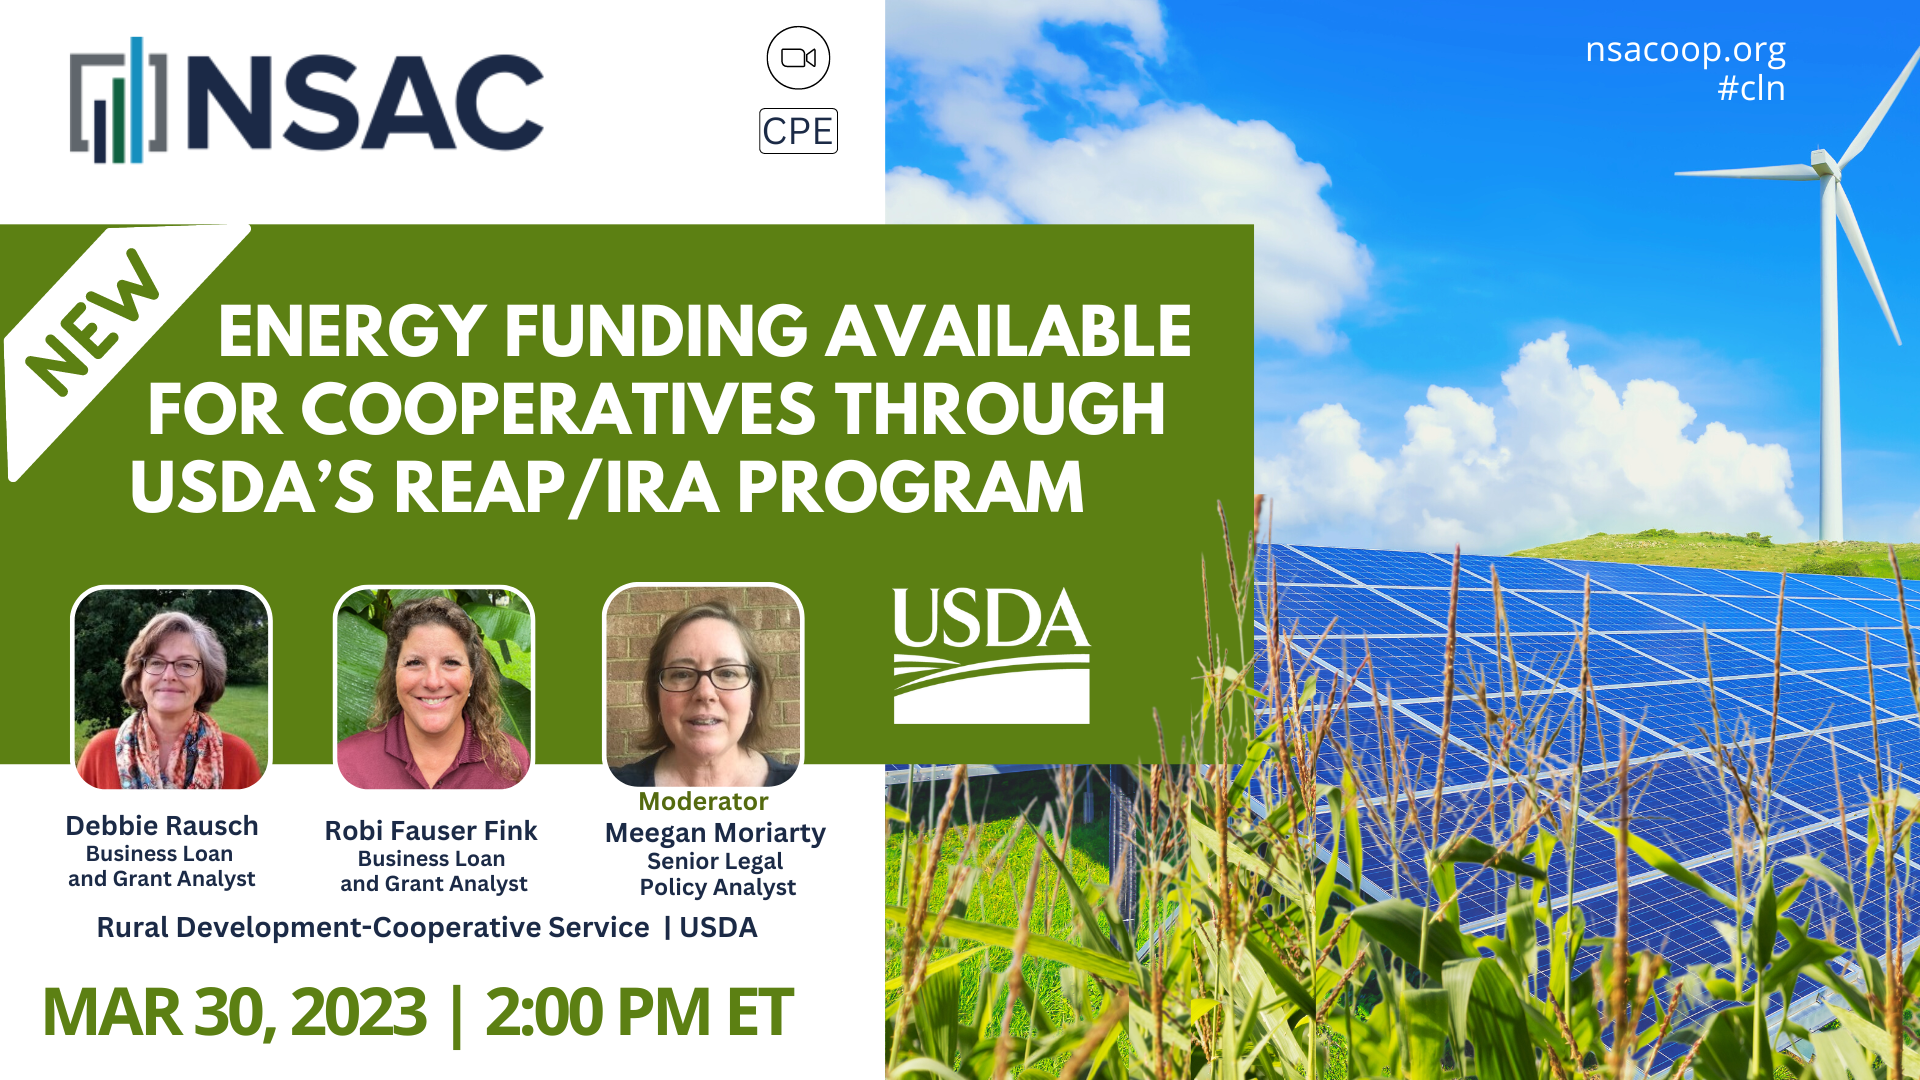 New Energy Funding Available for Cooperatives Through USDA’s REAP/IRA Program